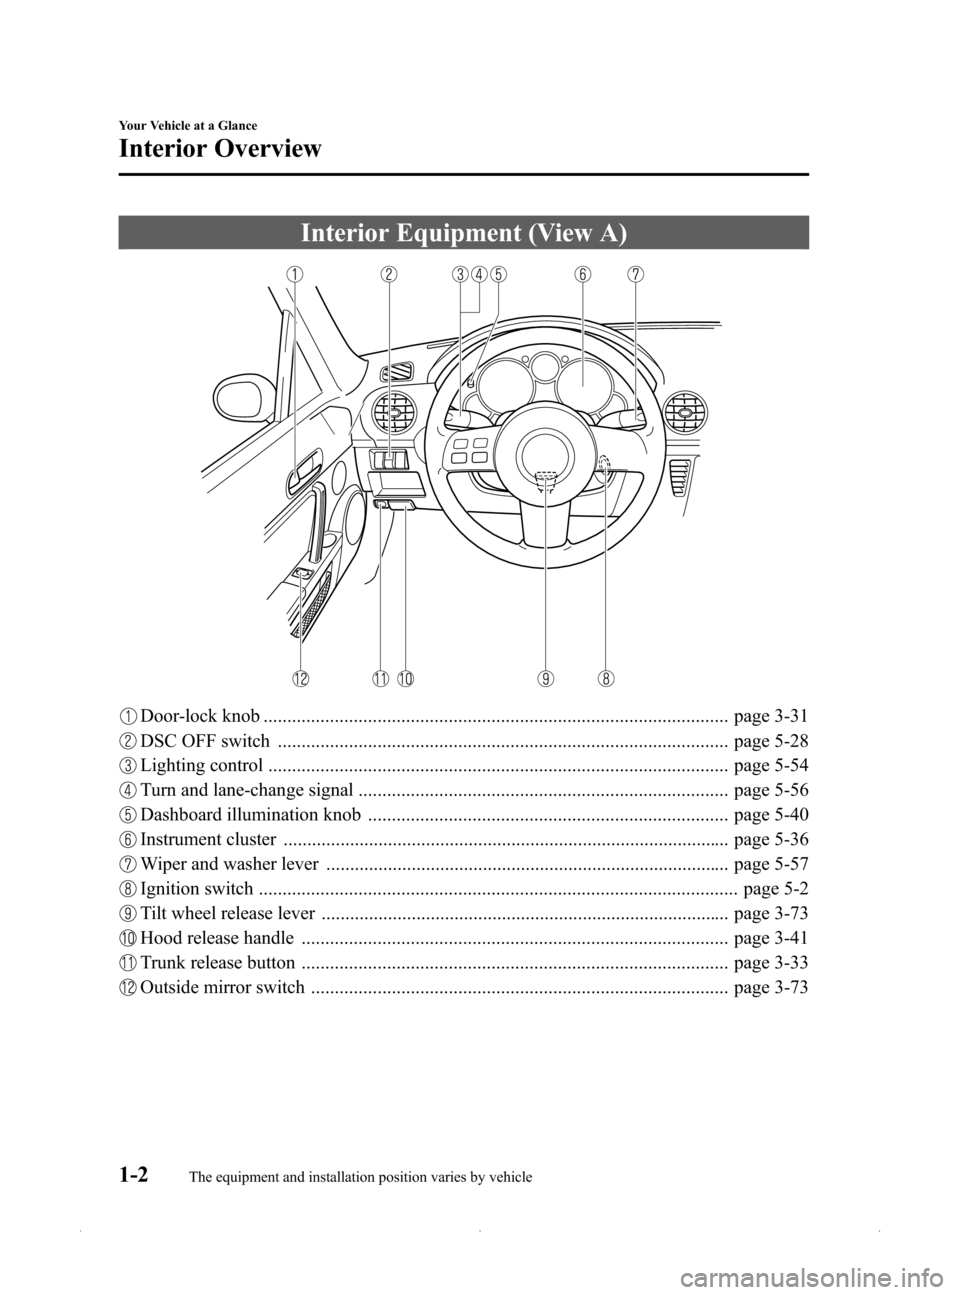 MAZDA MODEL MX-5 2015  Owners Manual (in English) Black plate (8,1)
Interior Equipment (View A)
Door-lock knob .................................................................................................. page 3-31
DSC OFF switch ...............